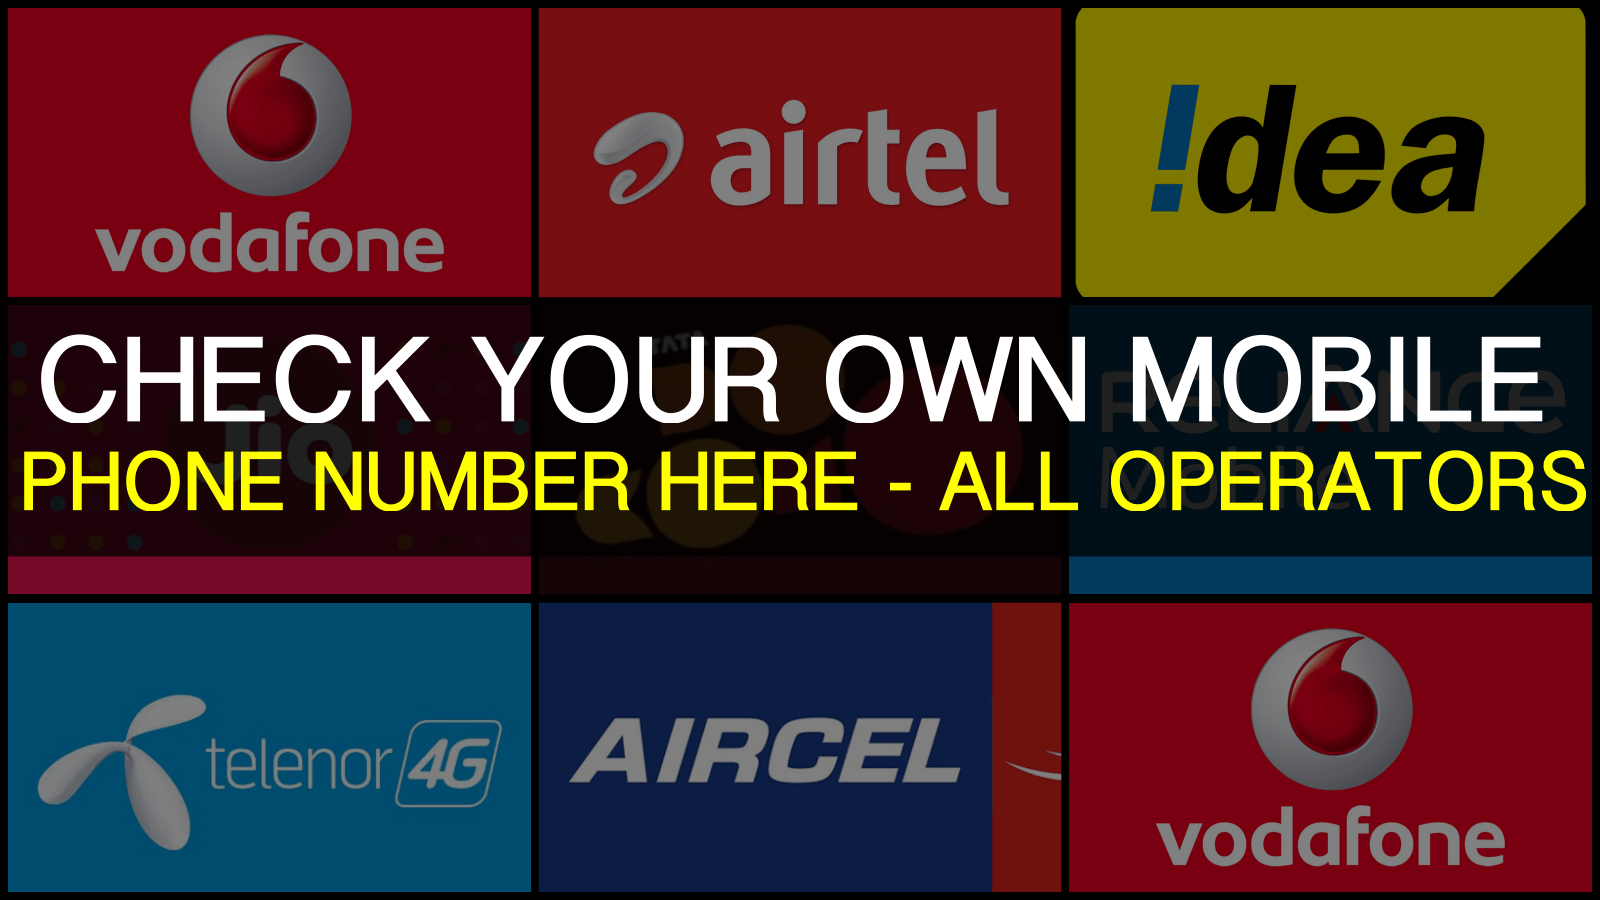 How to Check own mobile number on Airtel, Idea, Vodafone, BSNL, Docomo, Reliance Jio